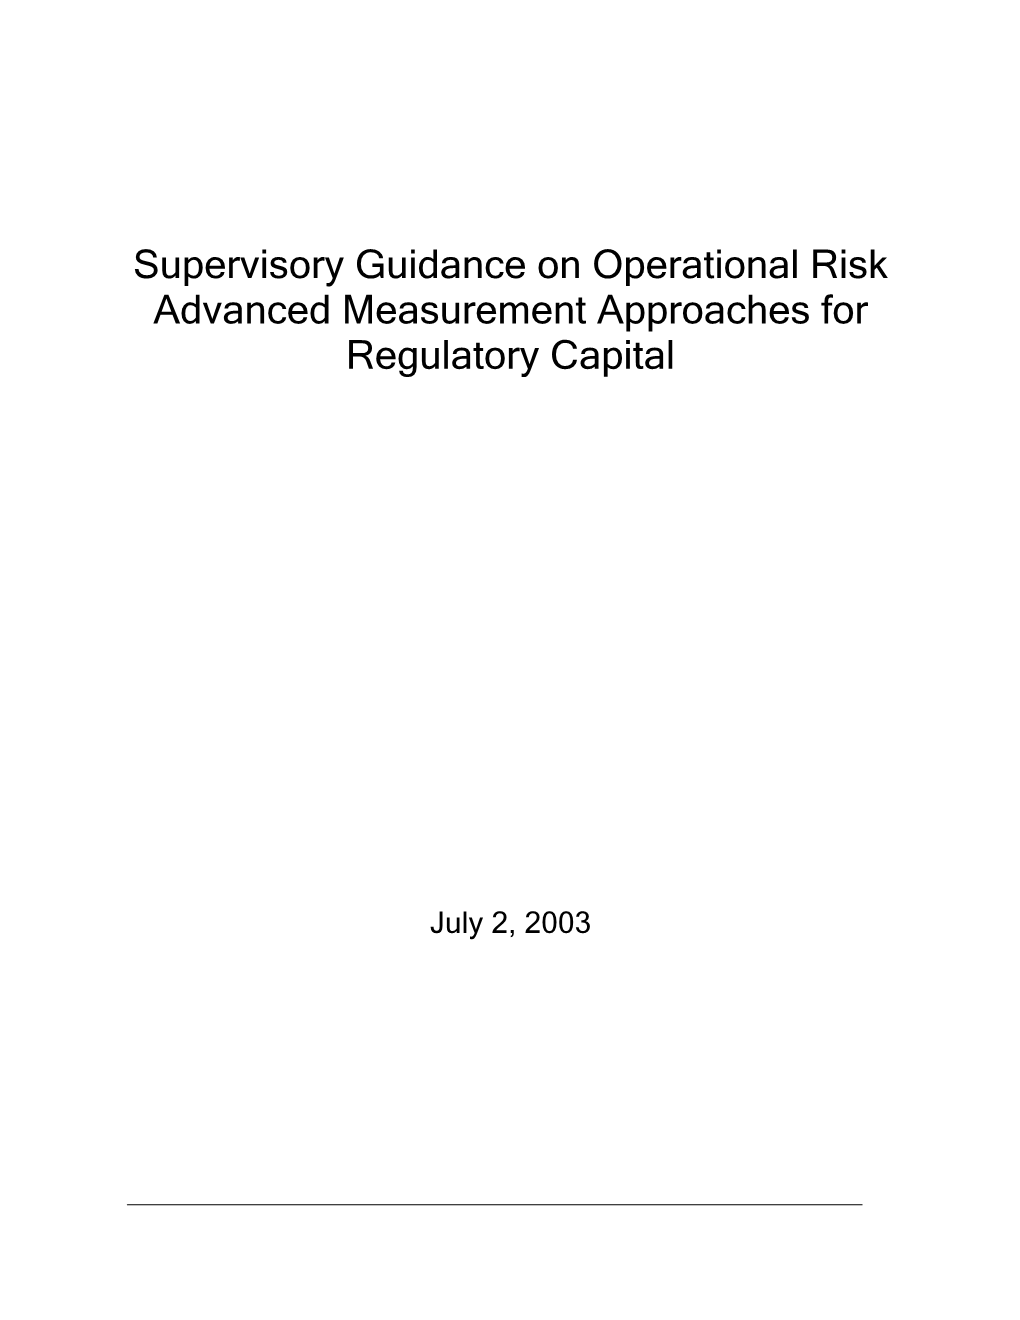 Supervisory Guidance on Operational Risk Advanced Measurement Approaches for Regulatory Capital